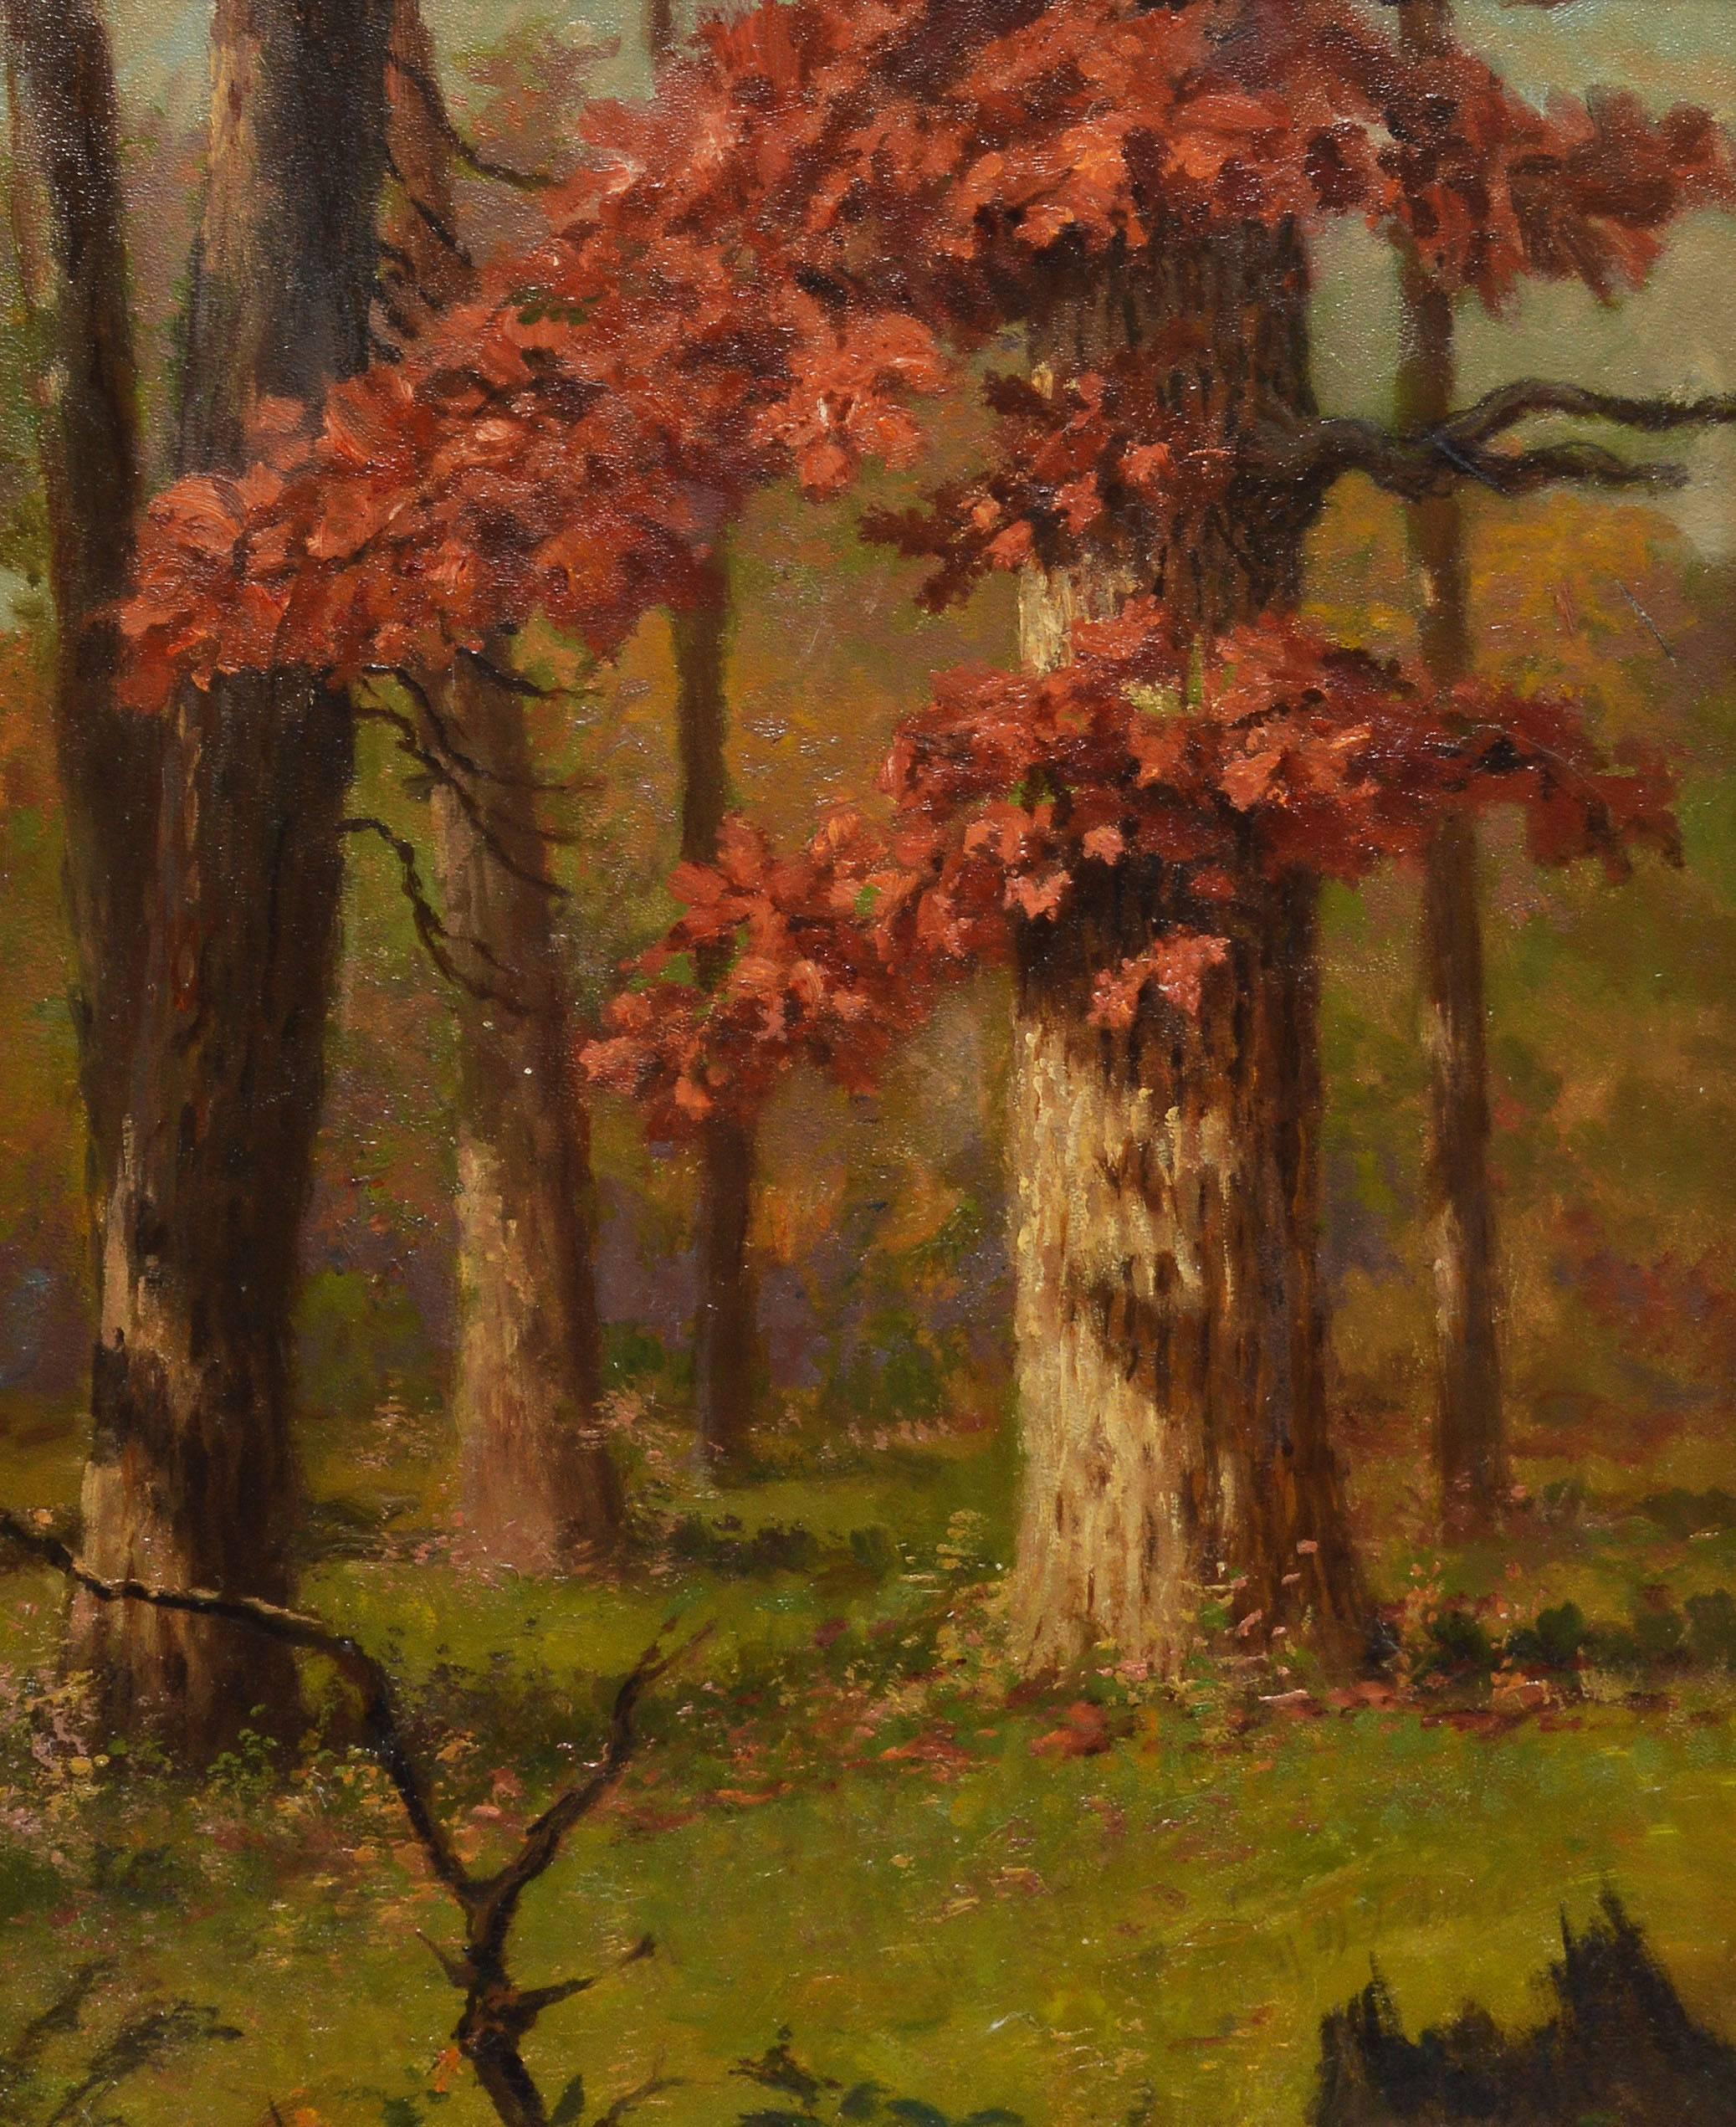 Impressionist view of a sunlit forest by Frank Waller  (1842 - 1923).  Oil on board, circa 1880.  Signed lower right.  Displayed in a giltwood frame.  Image size, 12